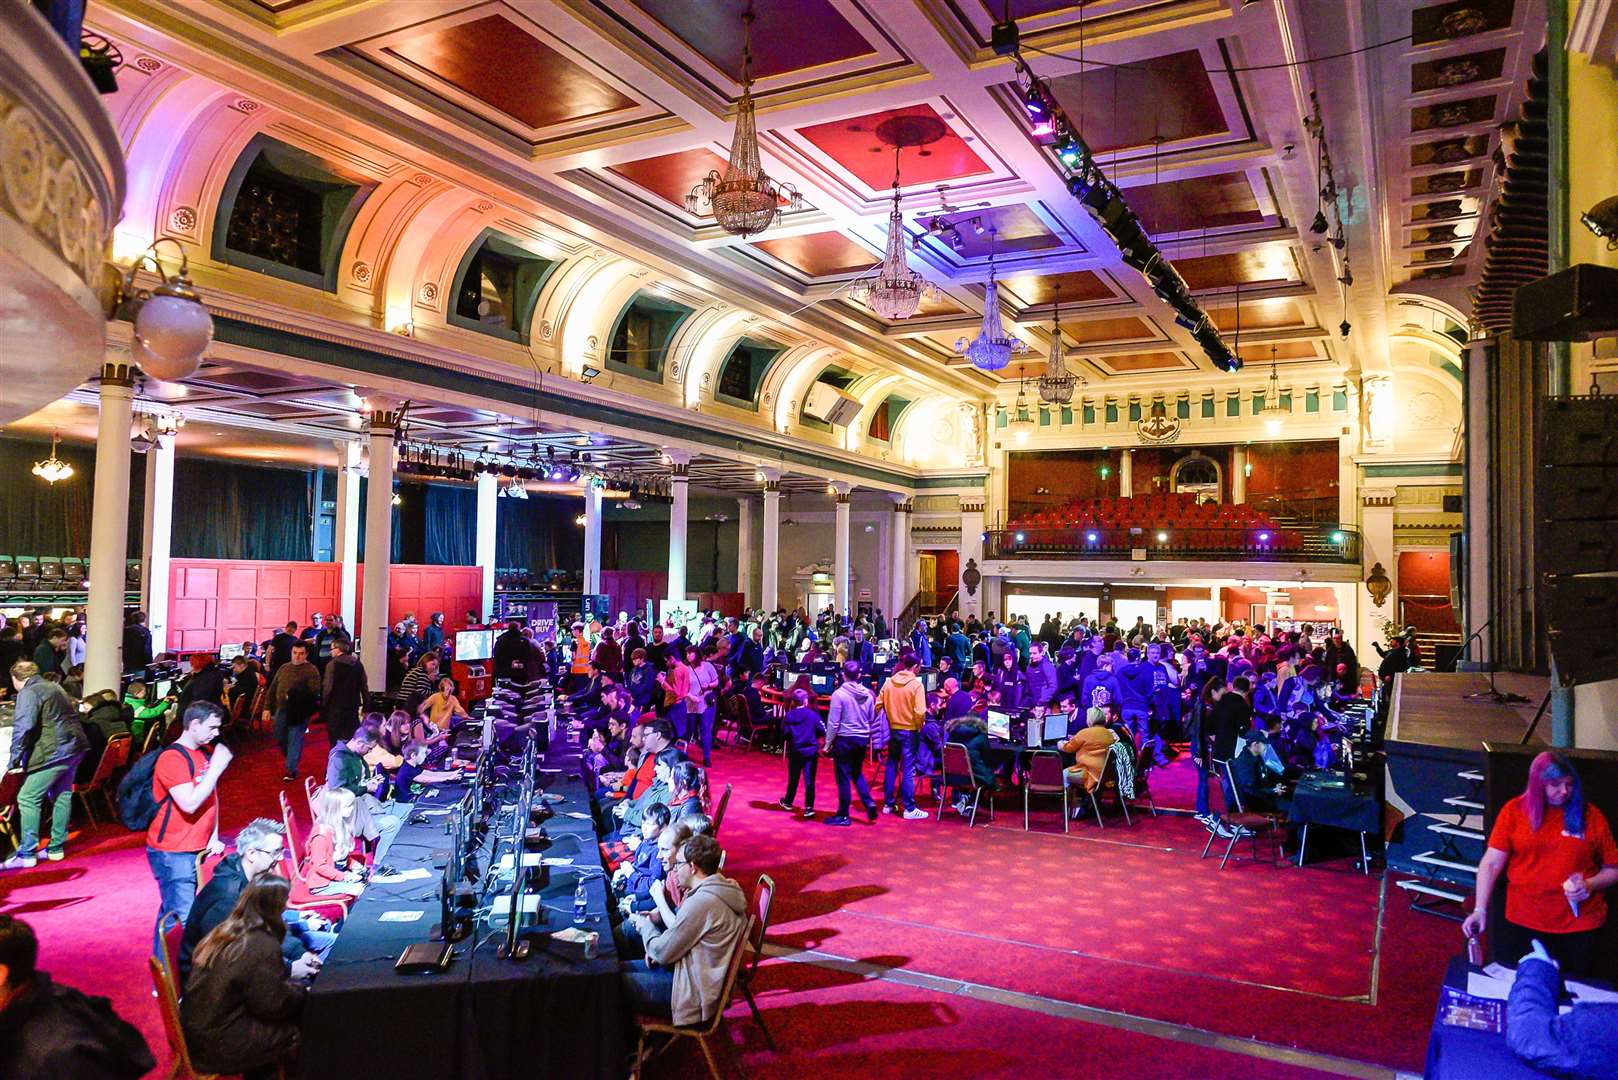 The main hall retains a splendour which rivals any other major venue in the county